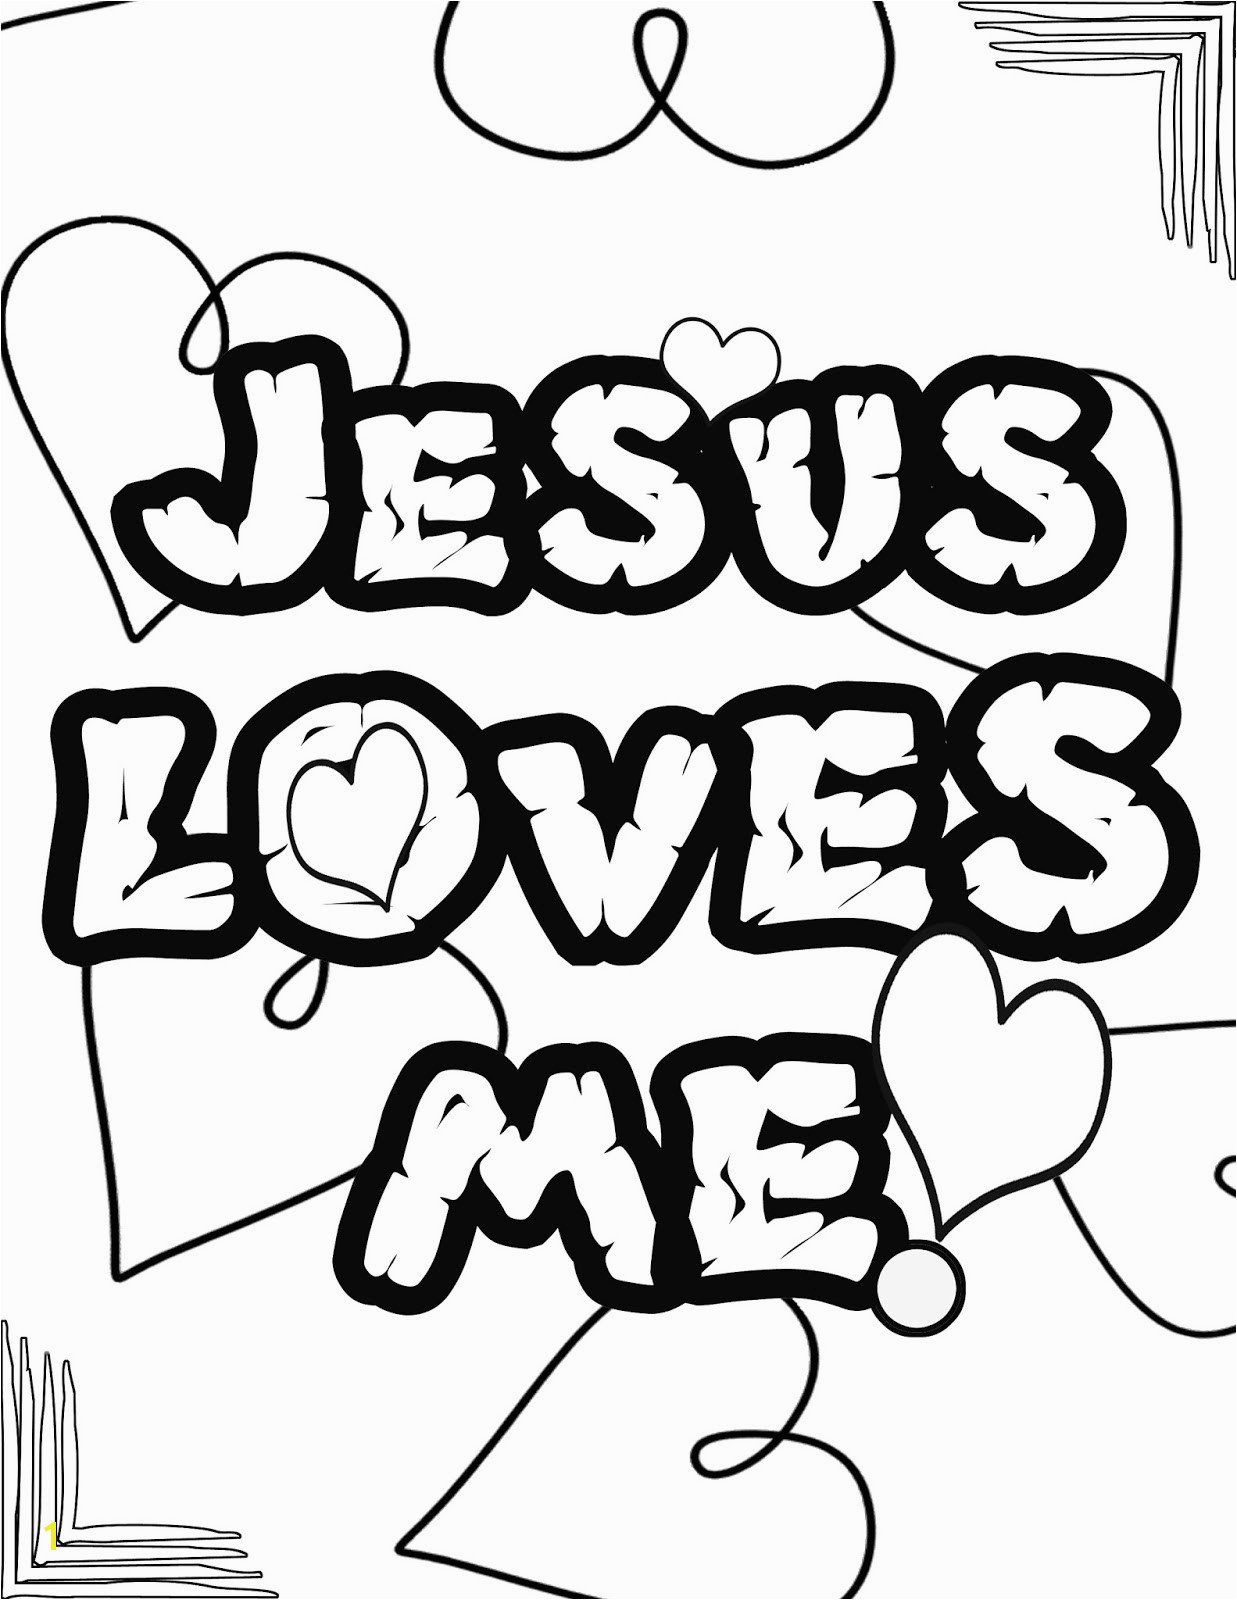 Inspirational Jesus Loves Me Coloring Page More Image Ideas